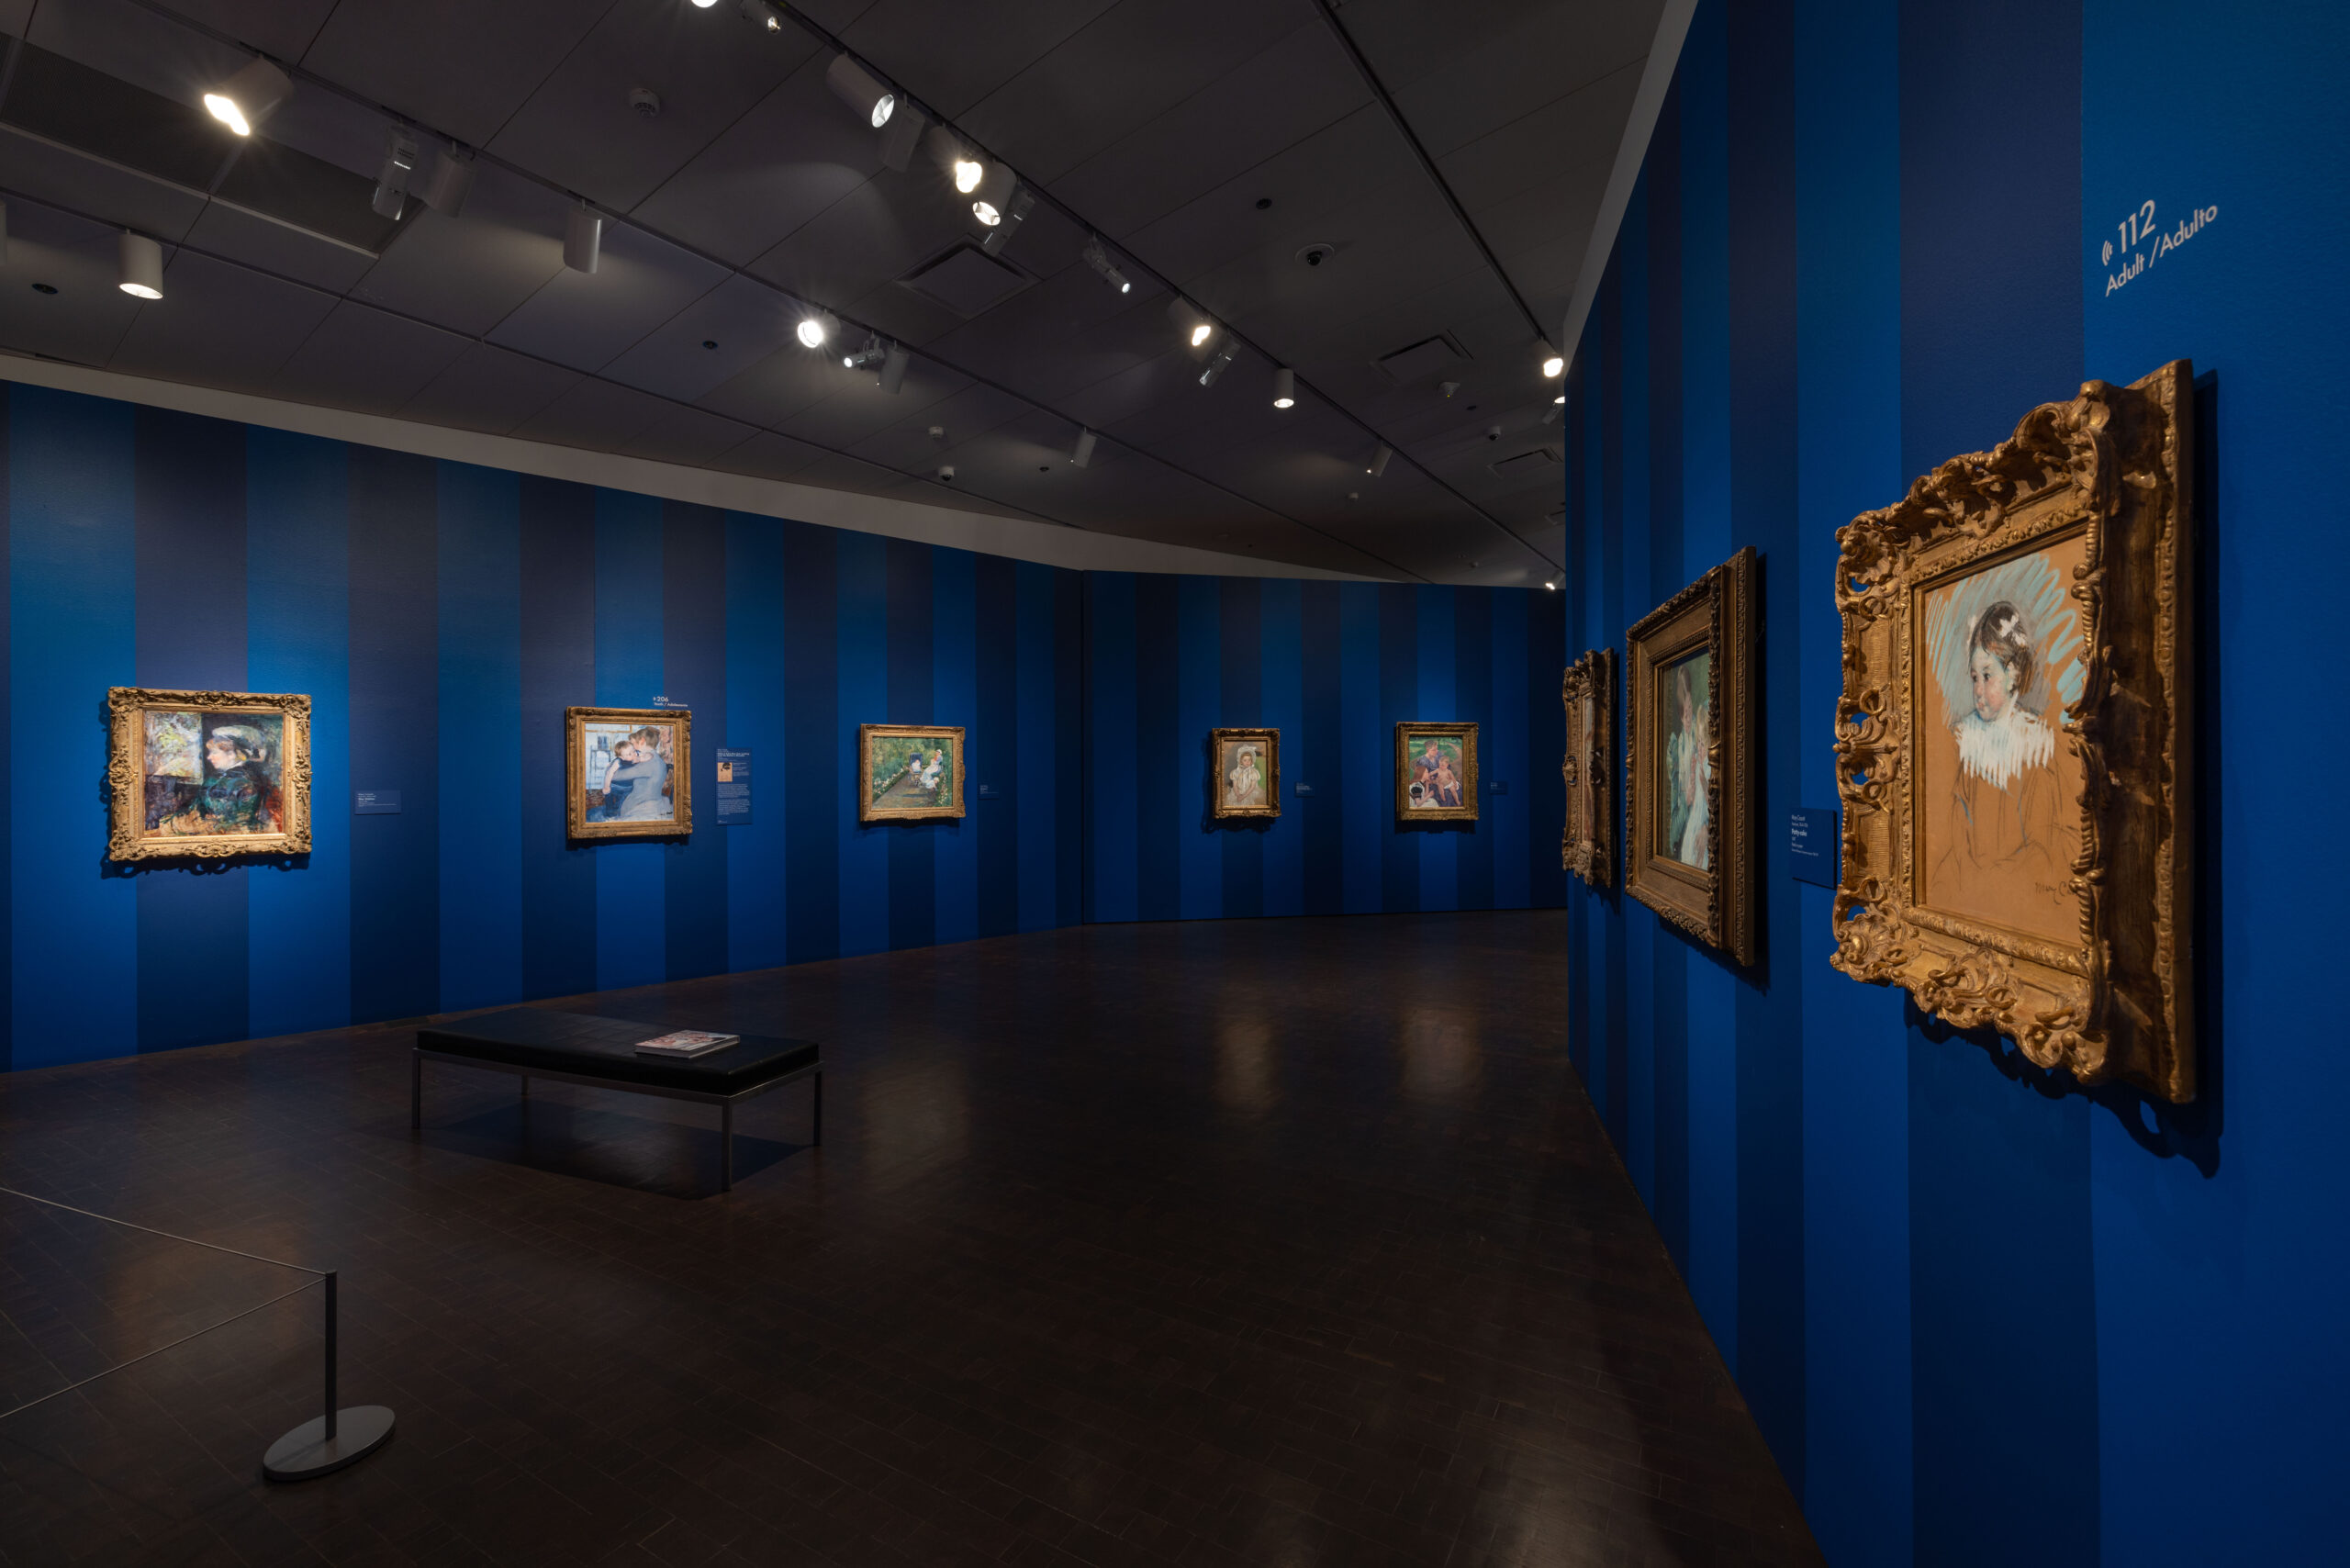 Interior of a museum gallery, the walls painted with wide, deep blue stripes, with eight lavishly framed paintings on the walls.